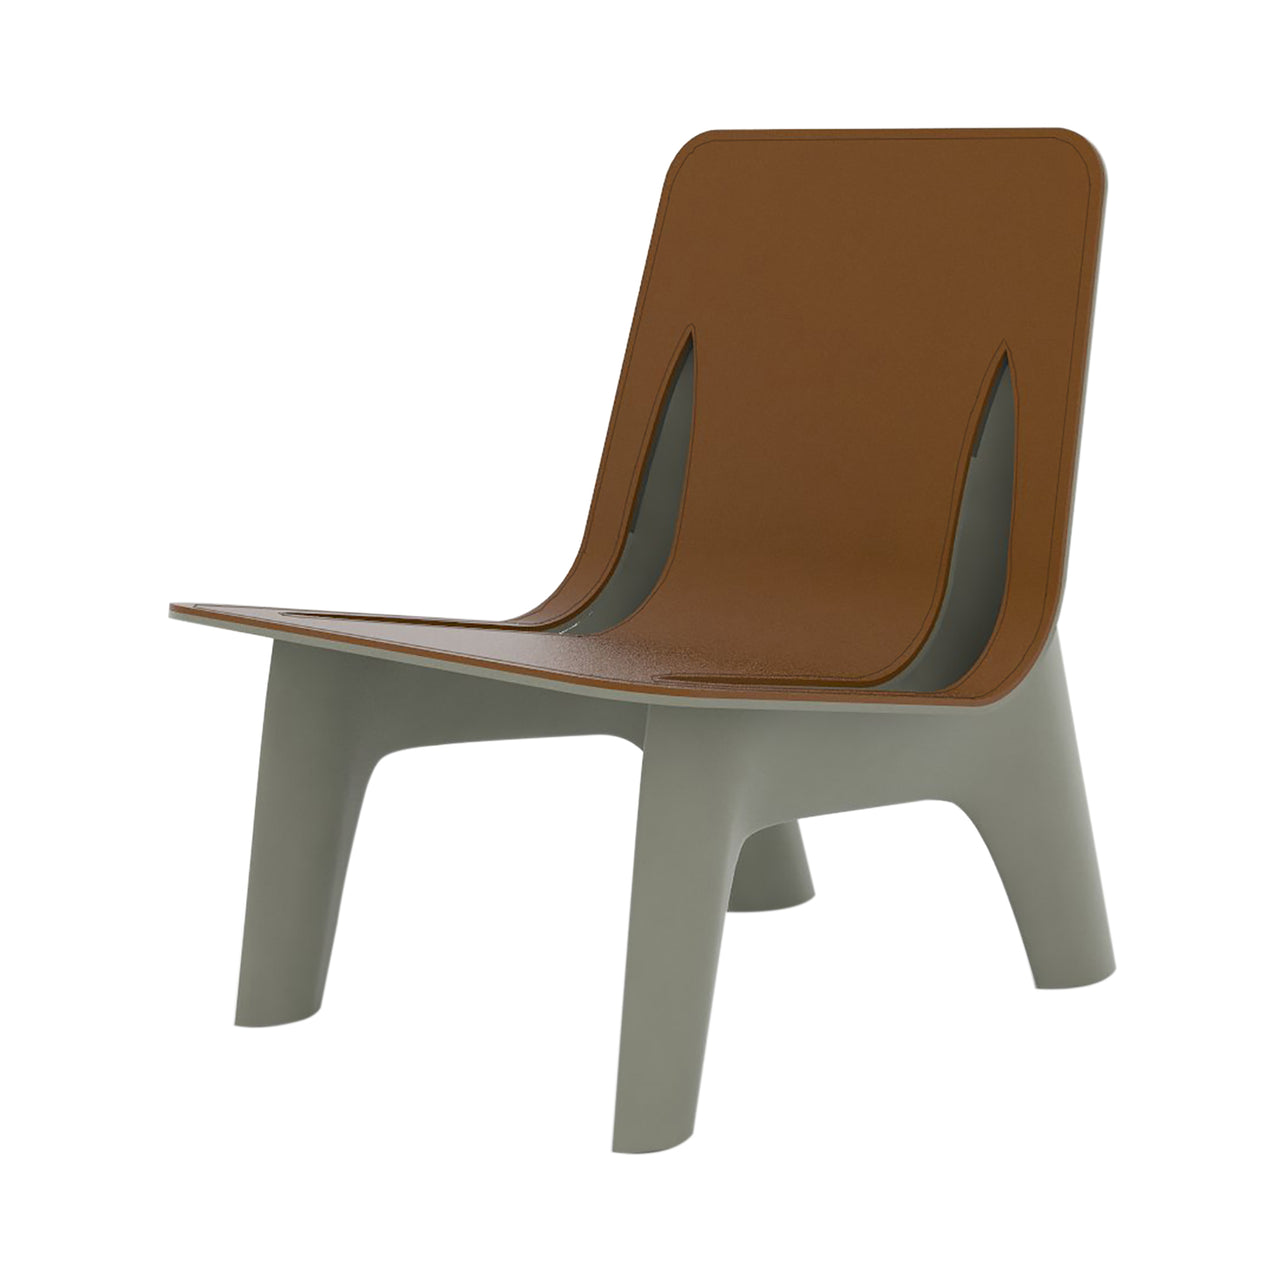 J-Chair Lounge: Leather Seat + Aluminum + Beige Grey + Brown